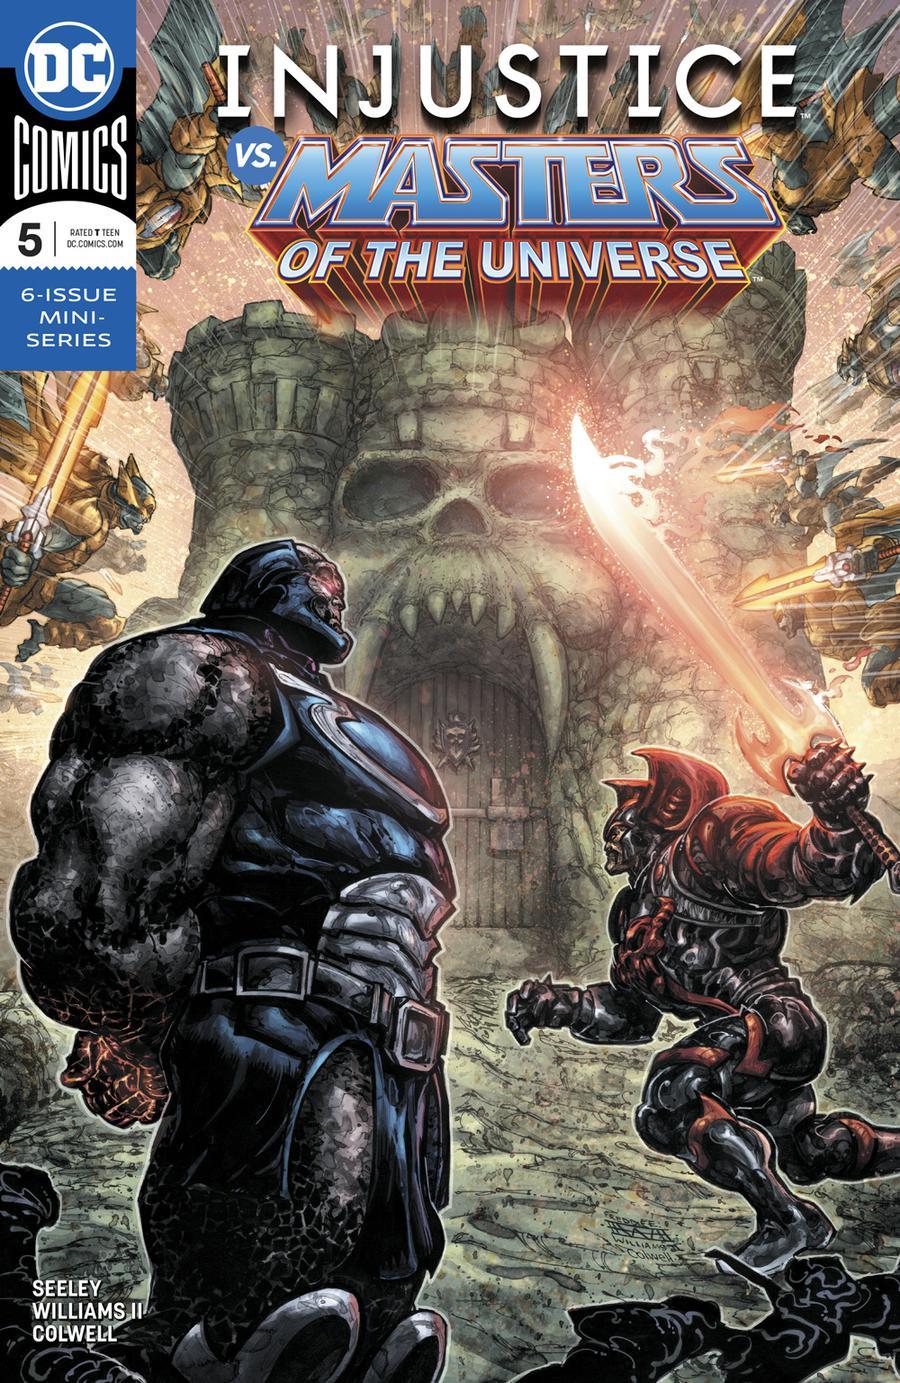 Injustice vs The Masters Of The Universe Vol. 1 #5